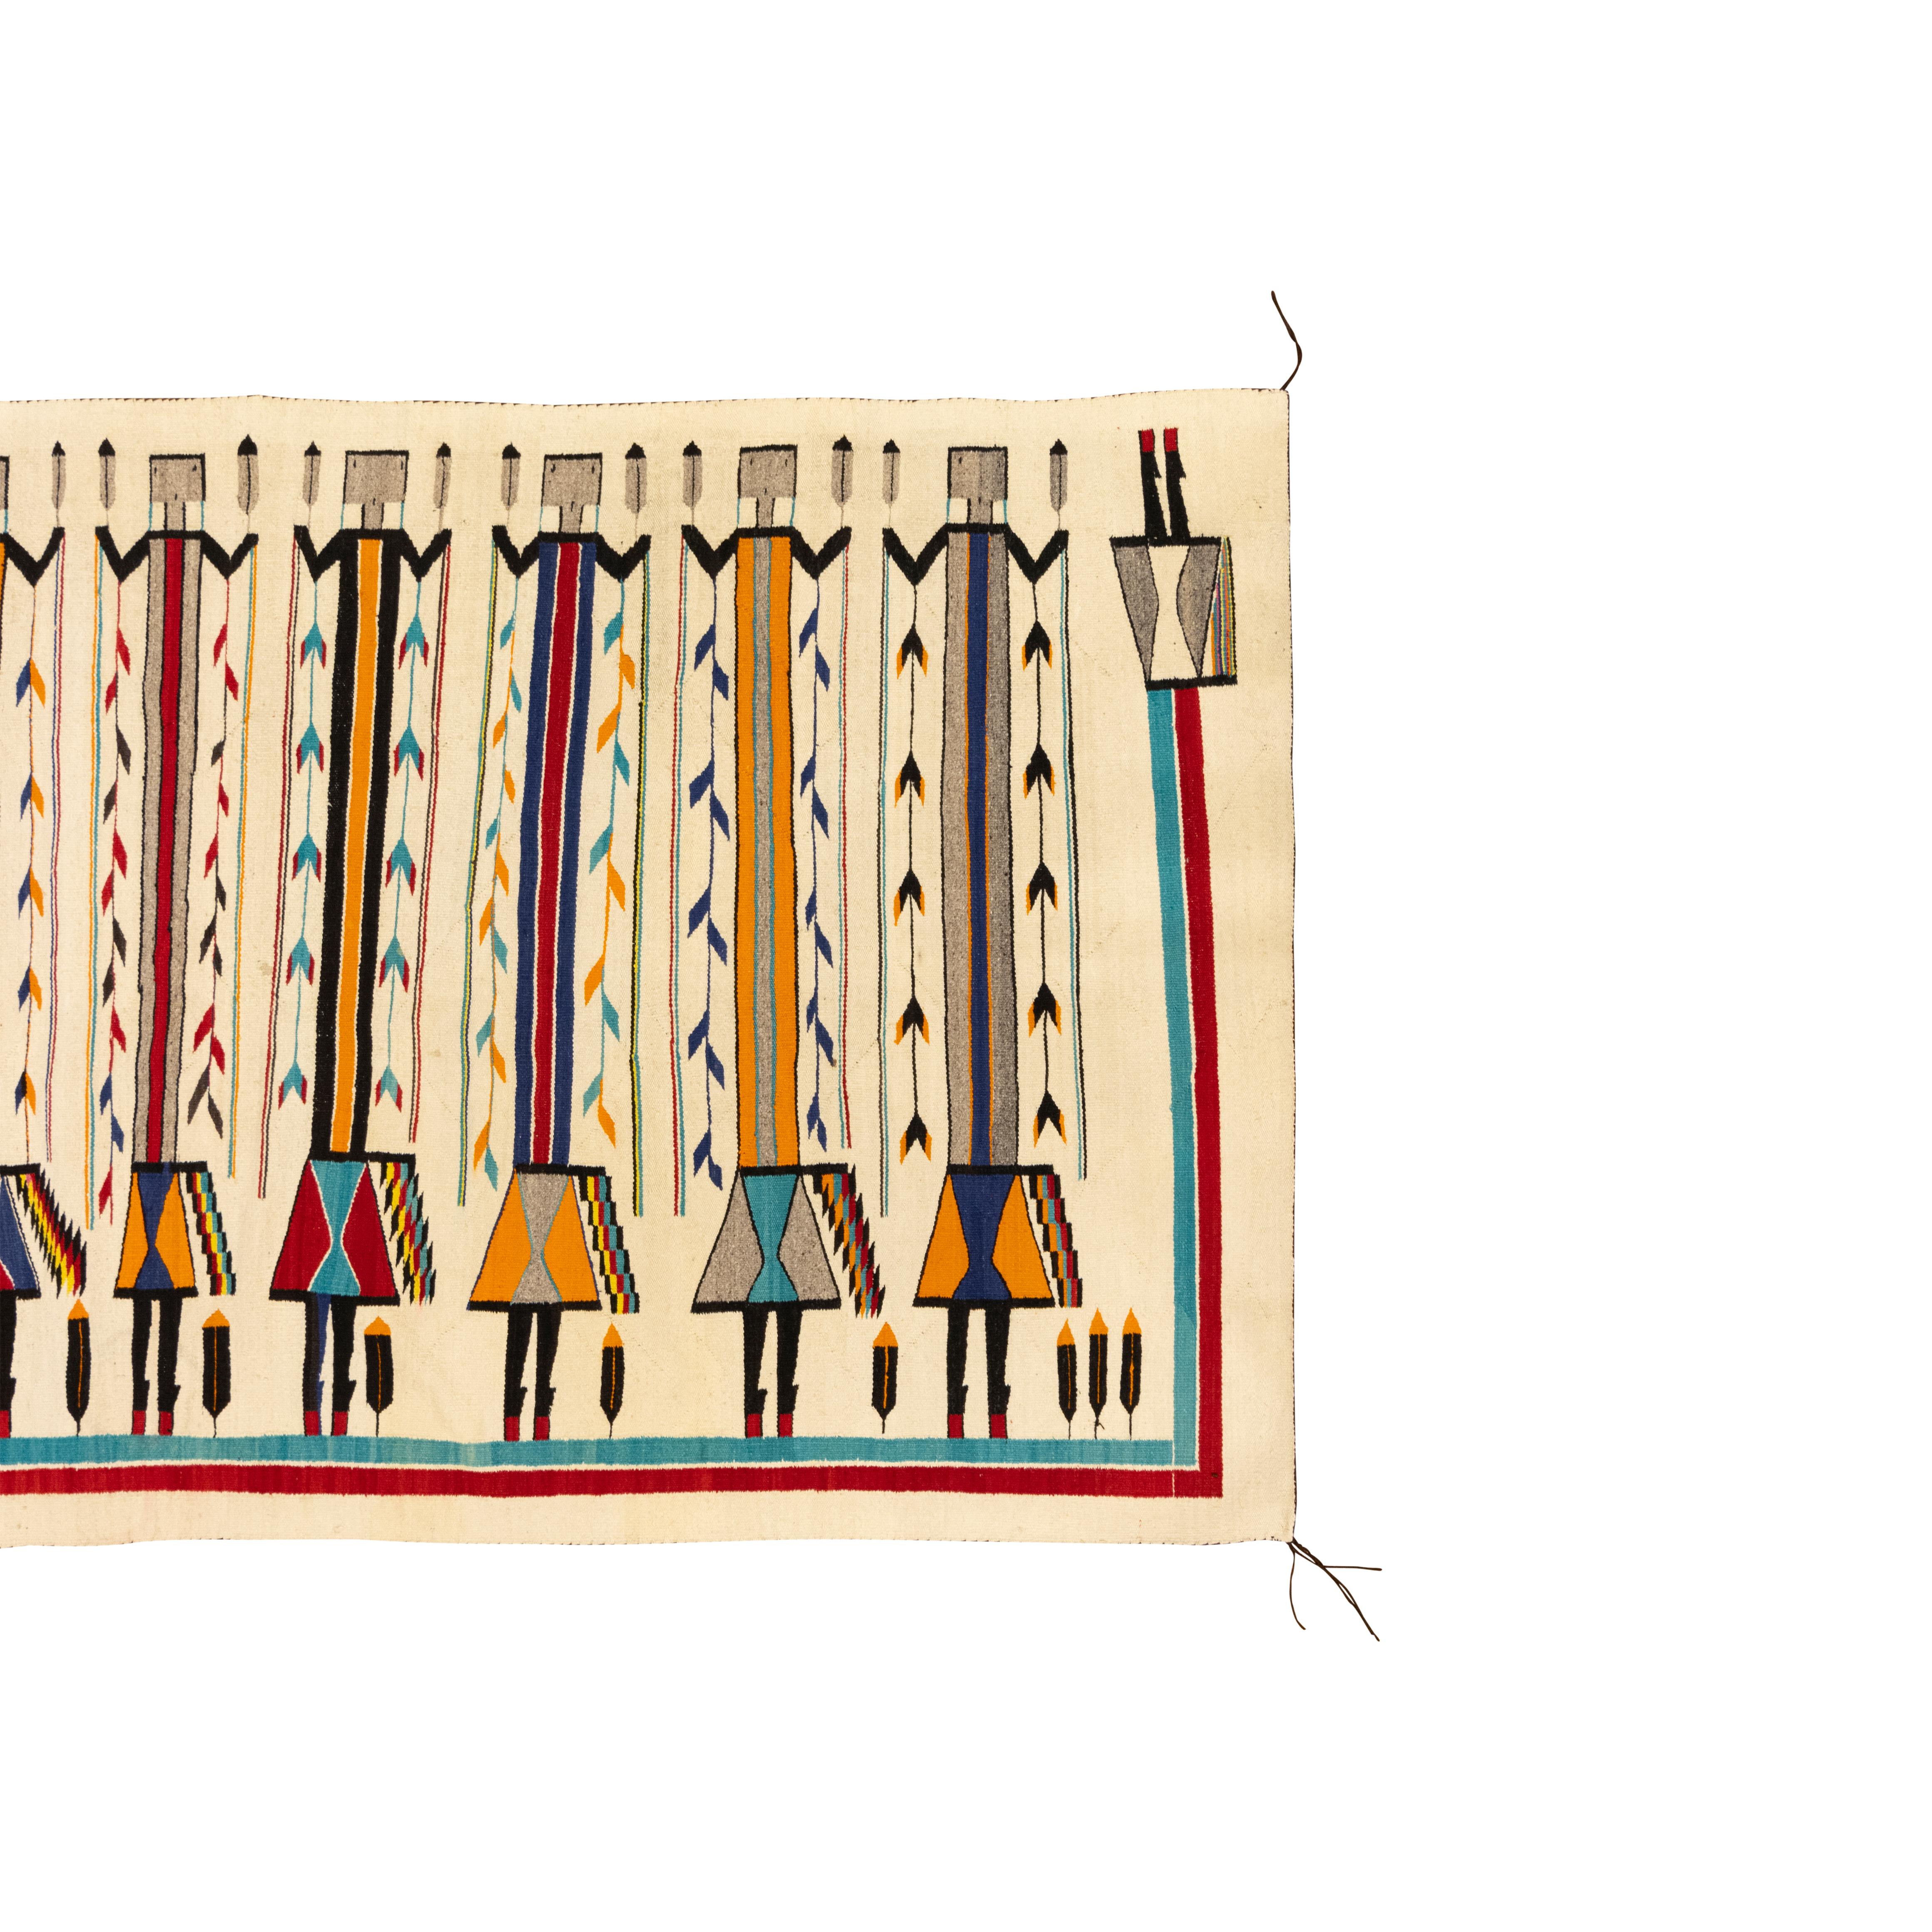 Seven figure pictorial Yei weaving. Bright colors, hand dyed yarns over natural cream background. Very little if any wear. Beautiful weaving! Great for floor or wall.

Origin: Navajo, Southwest
Period: circa 1930
Dimensions: 7' x 4'8